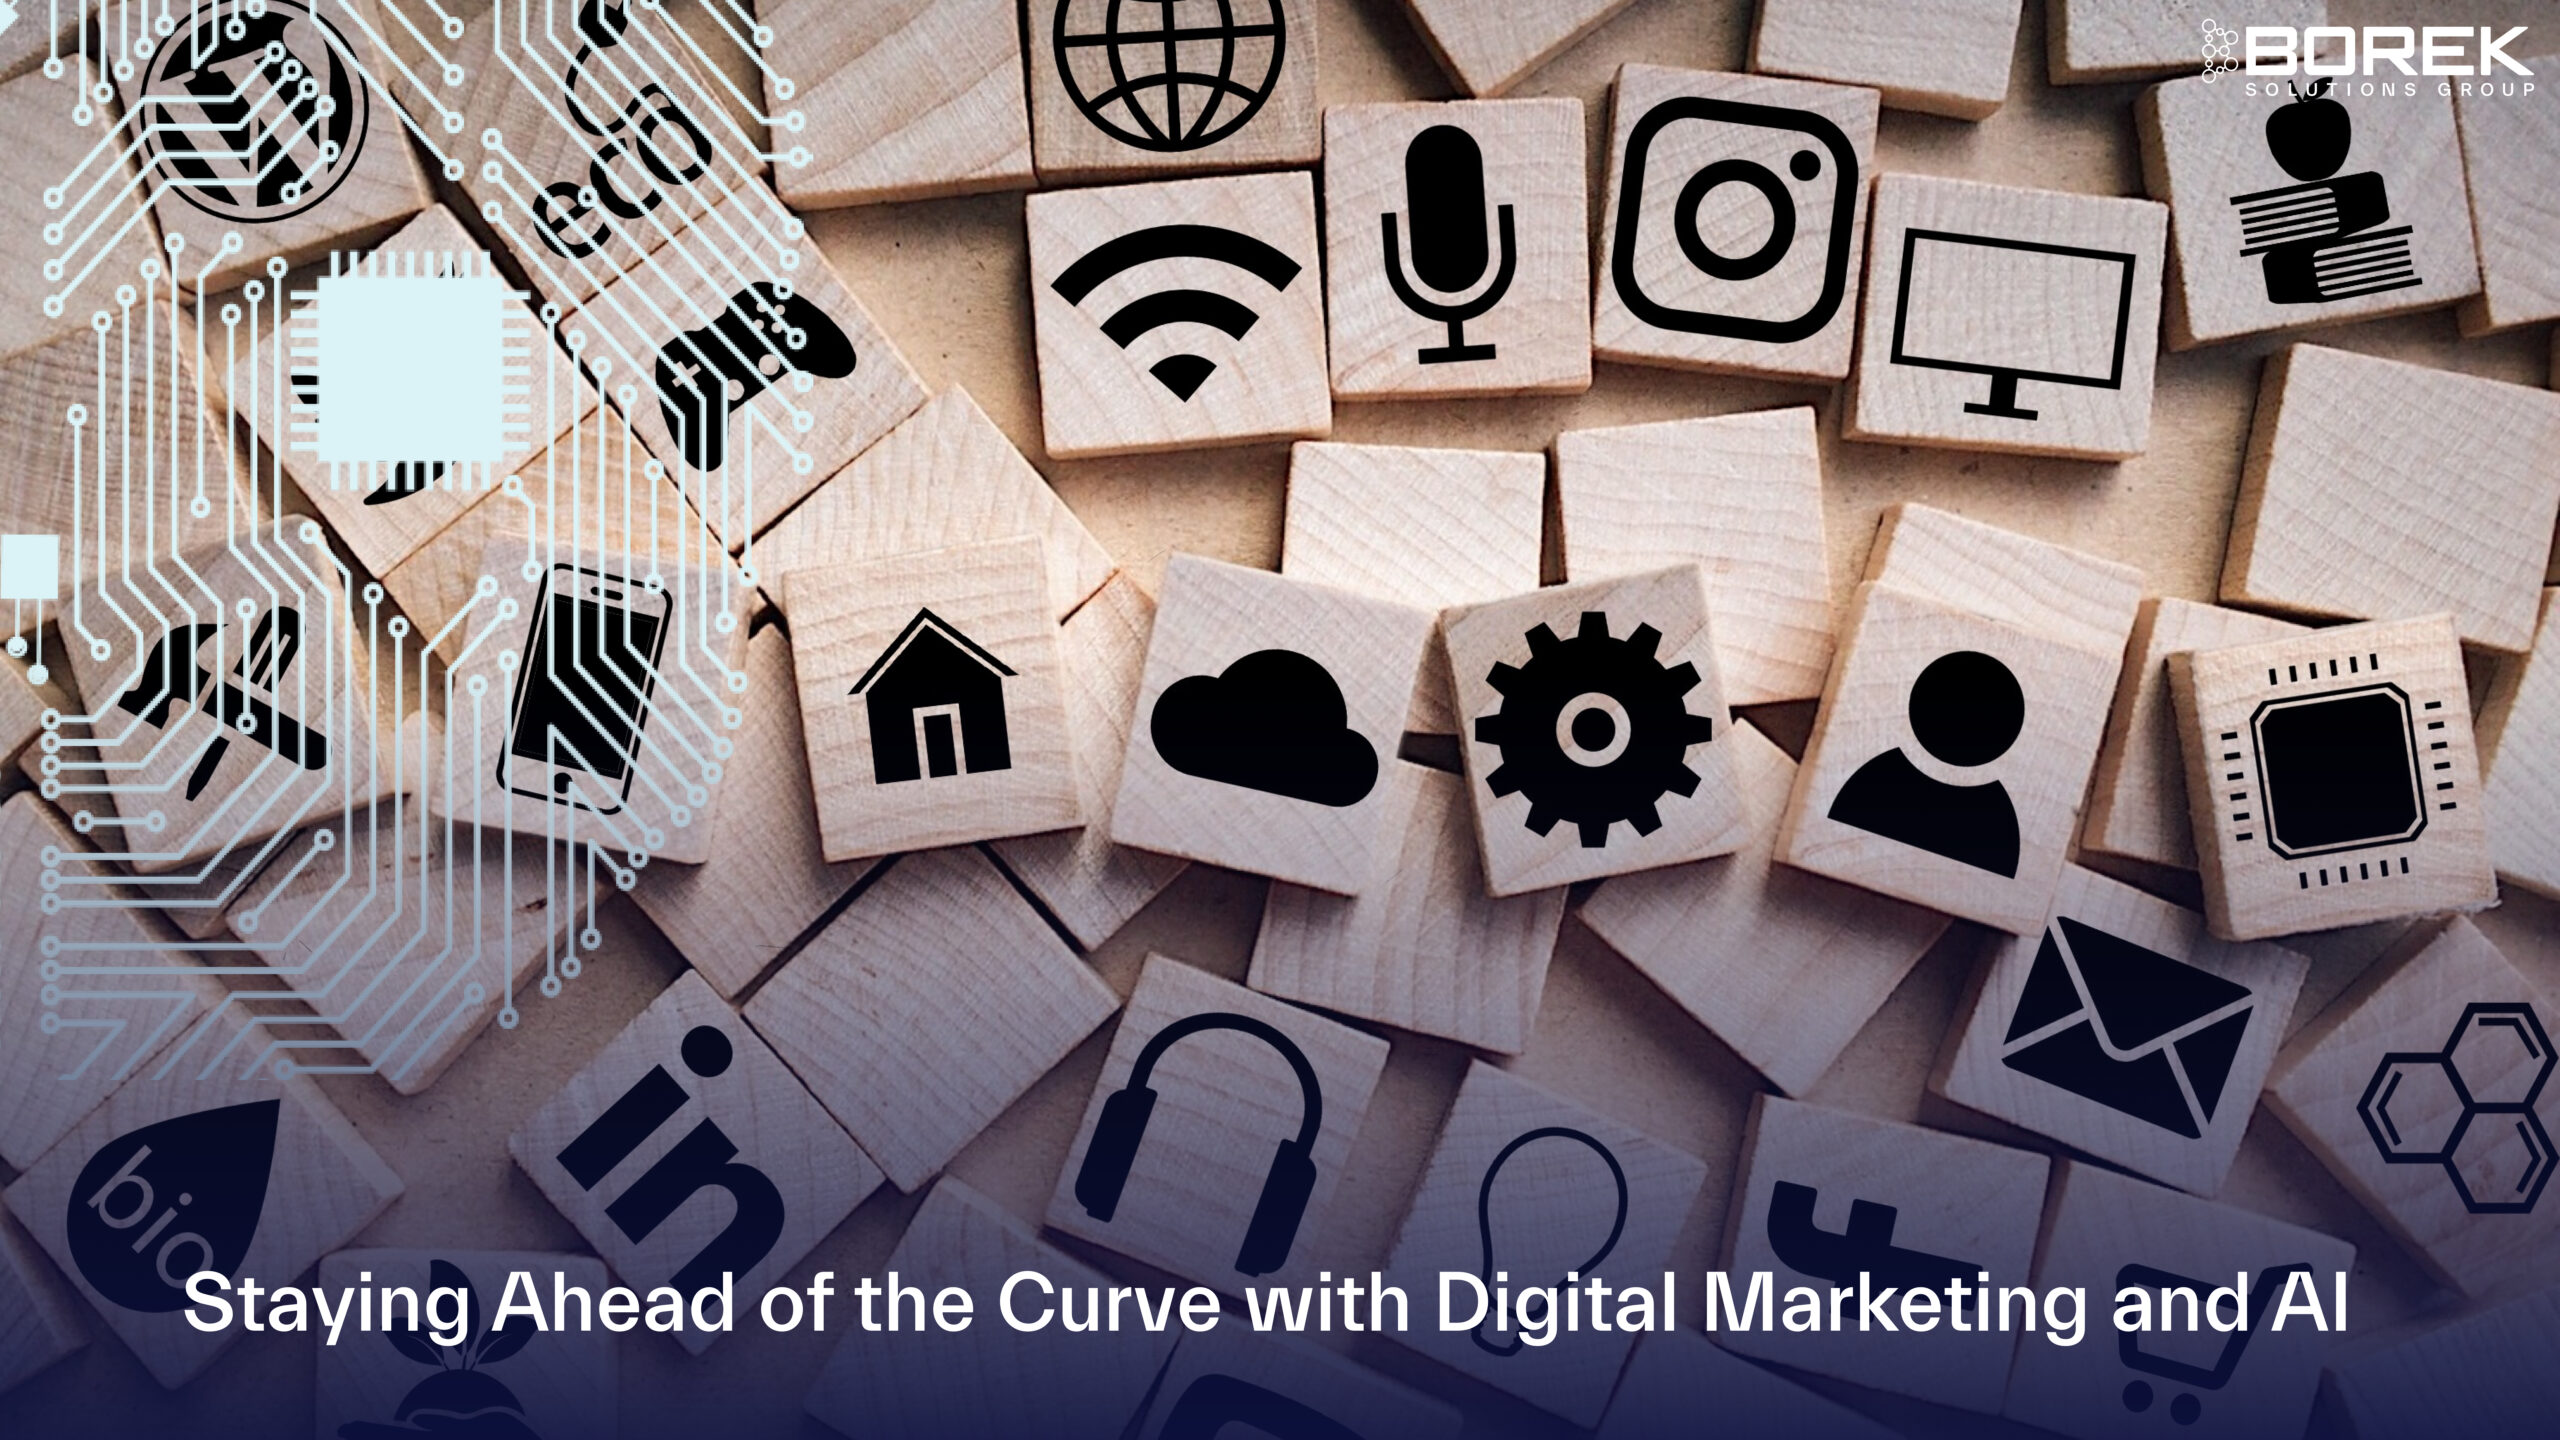 Staying Ahead of the Curve with Digital Marketing and AI